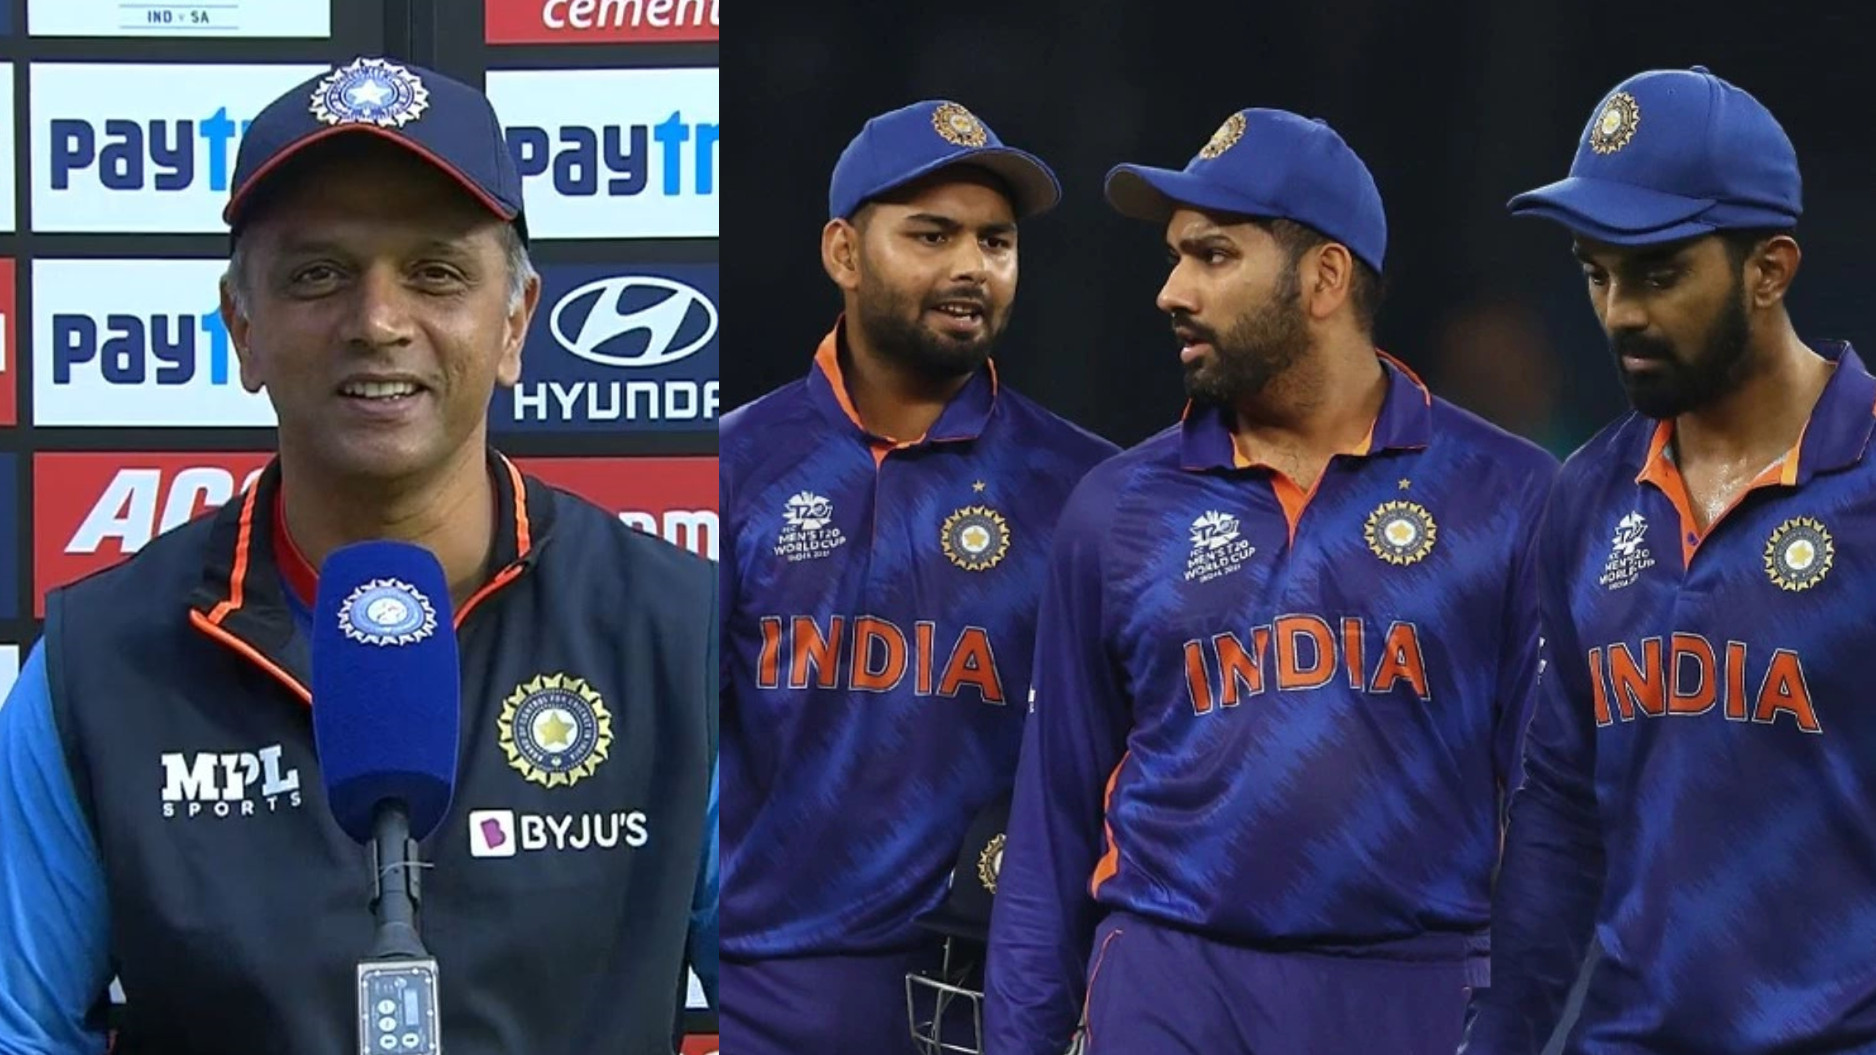 IND v SA 2022: “Challenging but fun”- Rahul Dravid on working with 6 captains in 8 months as India head coach